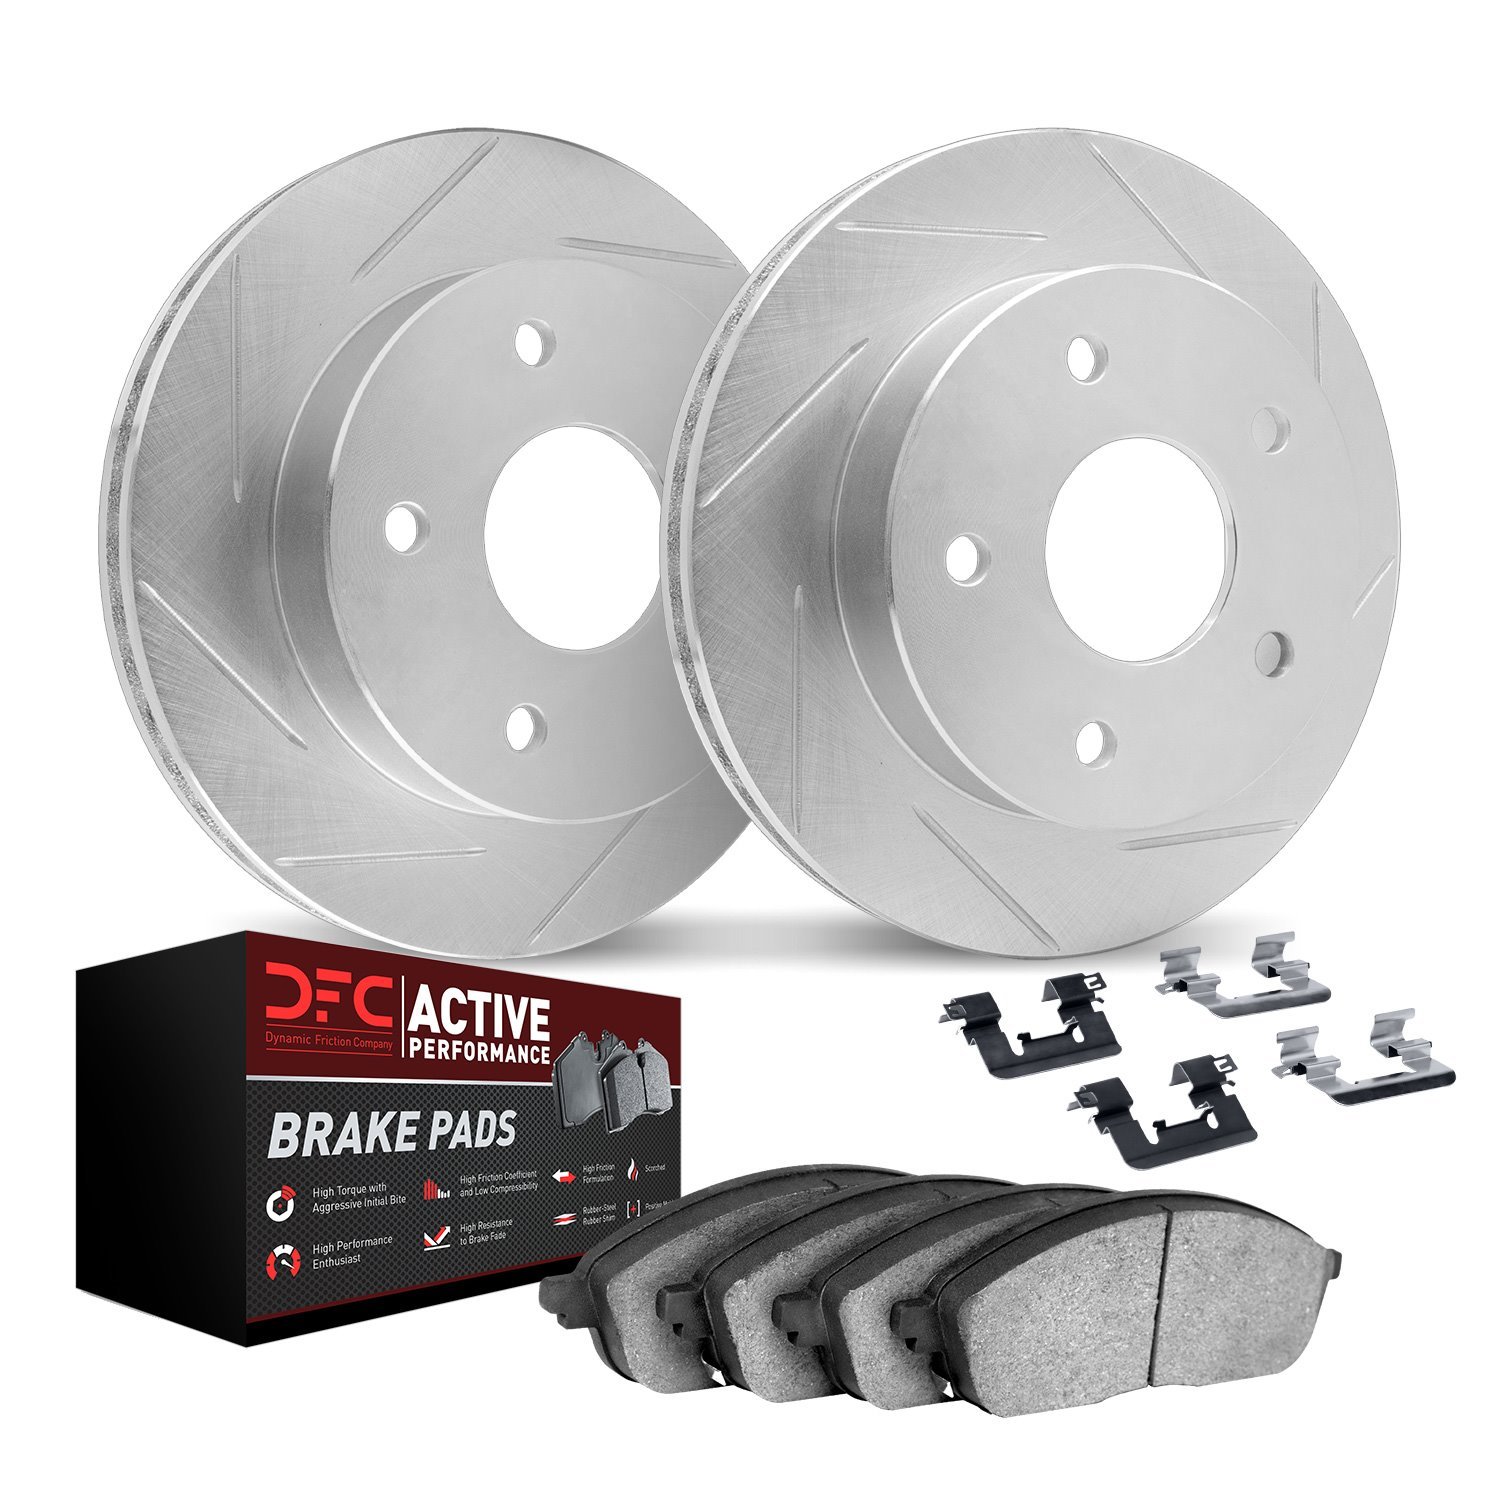 2712-59099 Geoperformance Slotted Brake Rotors with Active Performance Pads Kits & Hardware, 2002-2015 Acura/Honda, Position: Fr